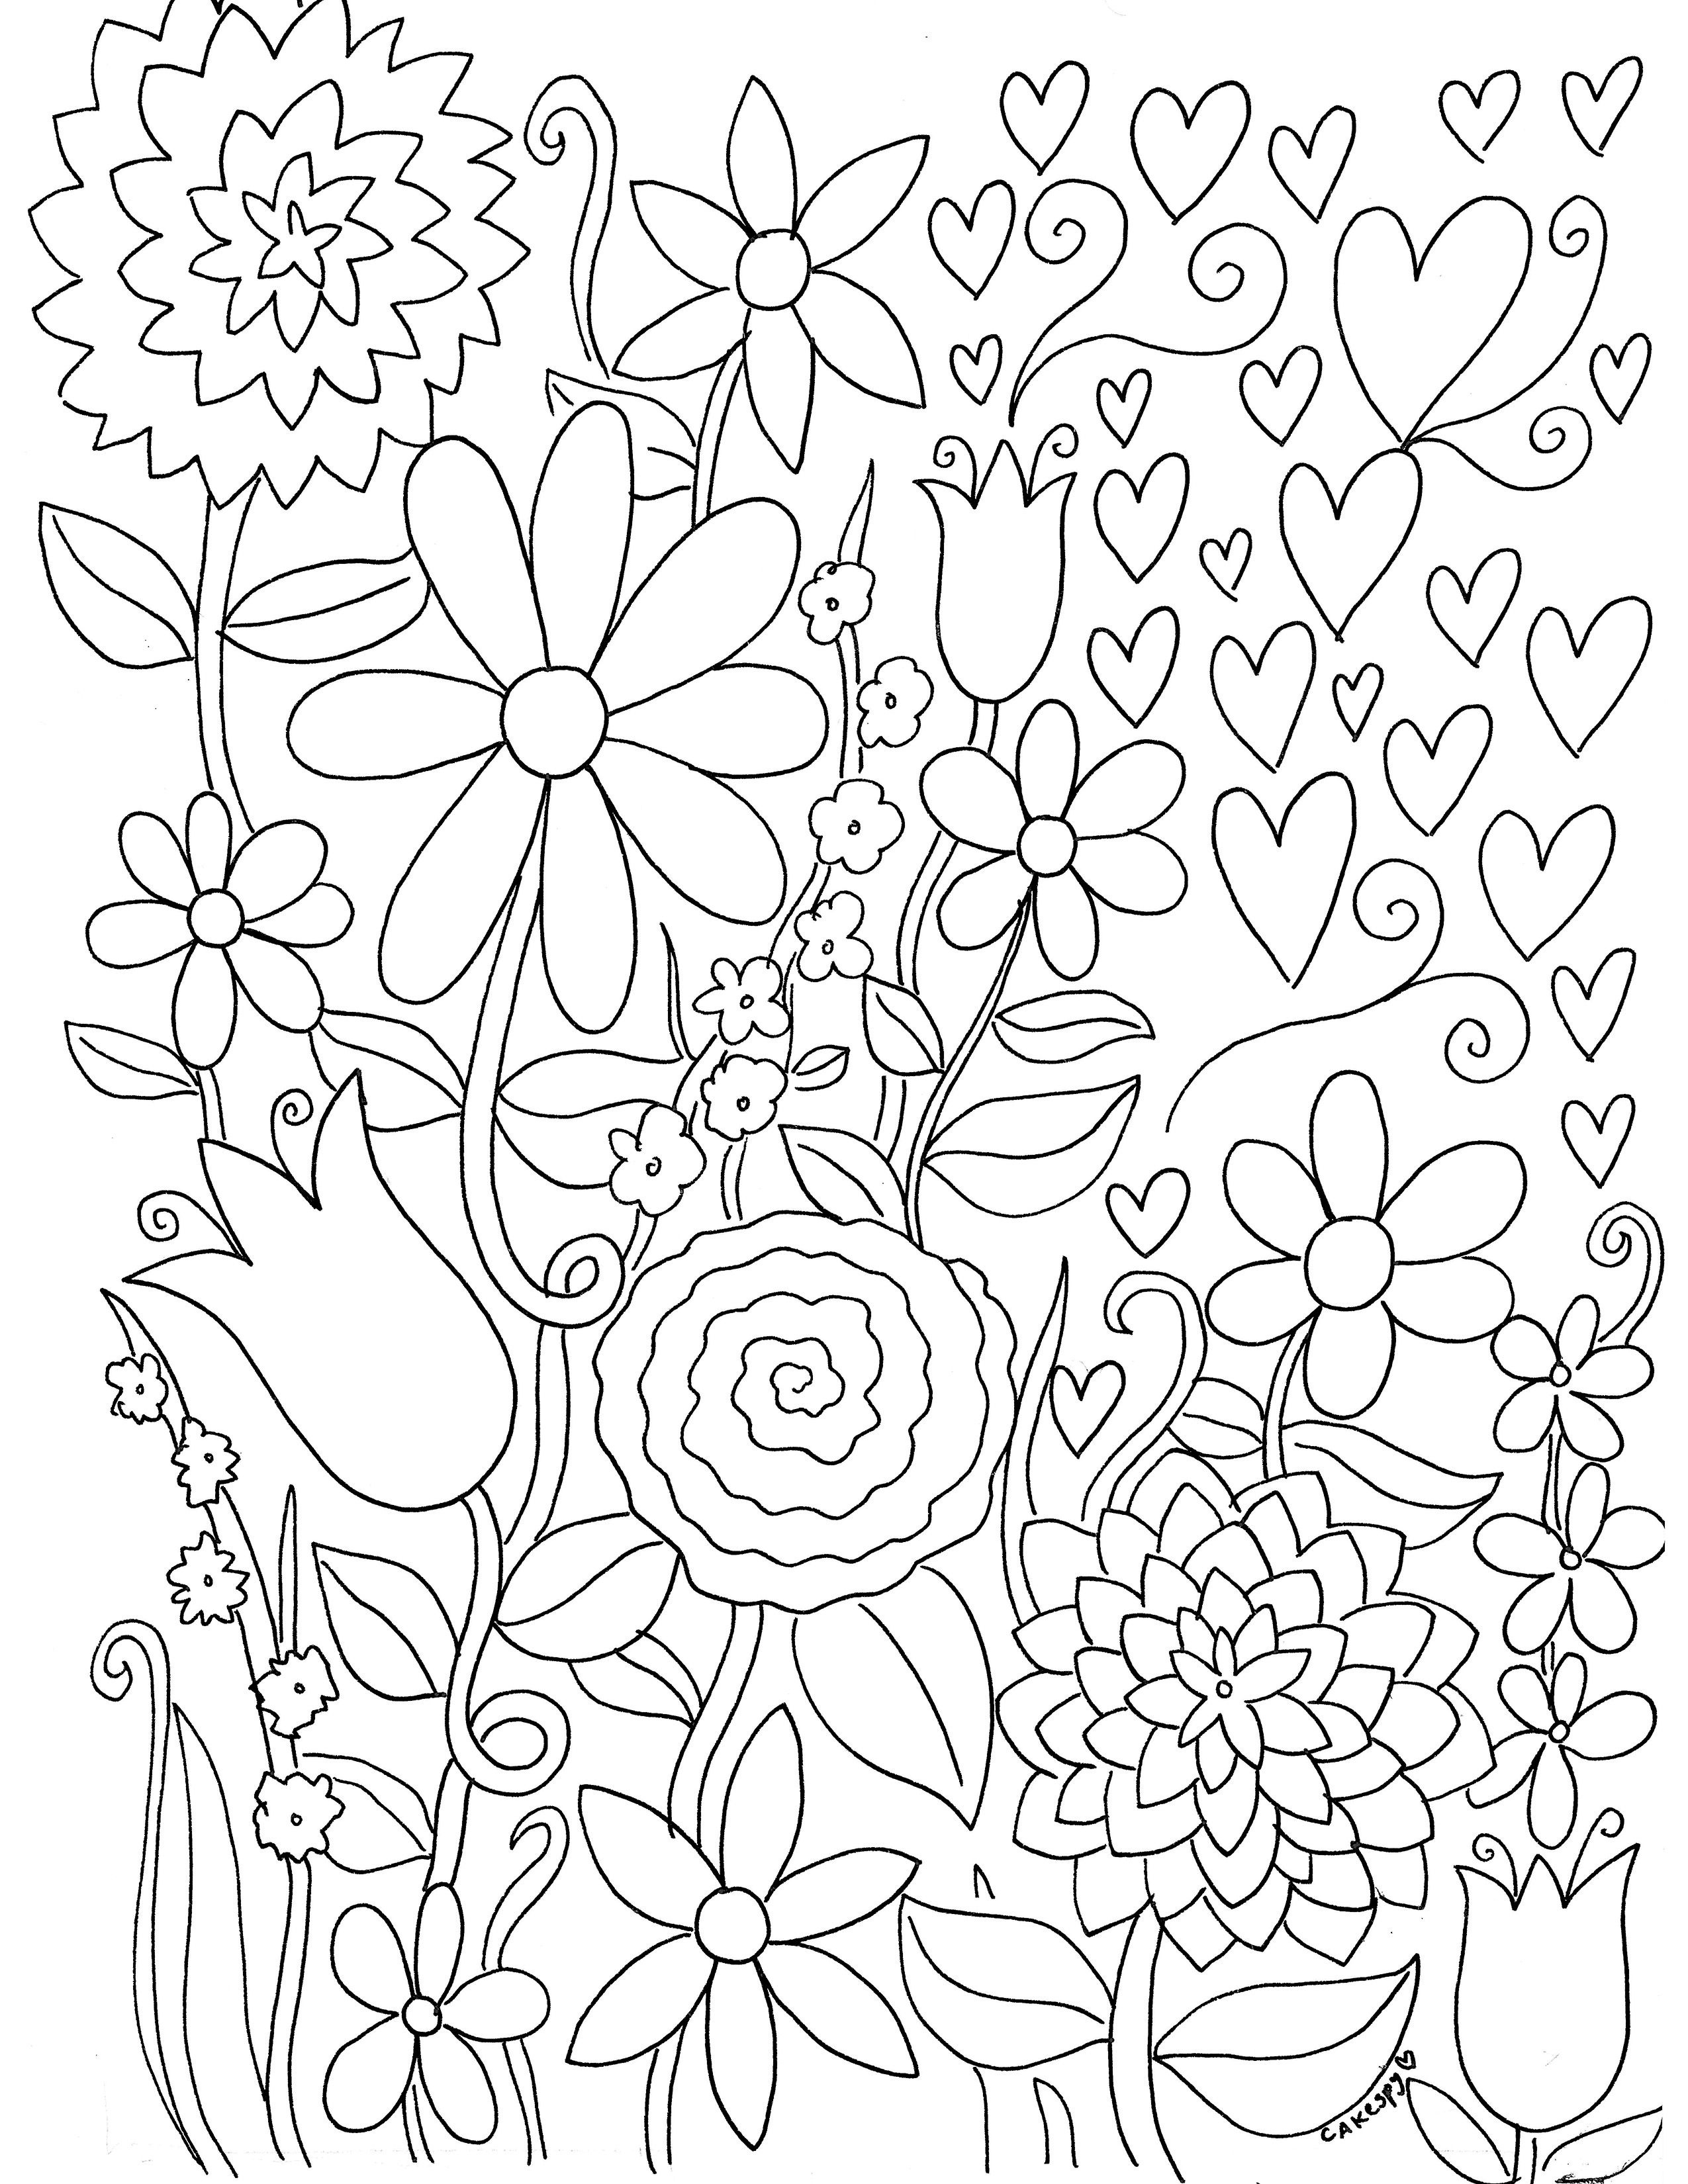 Free Paintnumbers For Adults Downloadable | *printable Art - Free Printable Coloring Book Pages For Adults